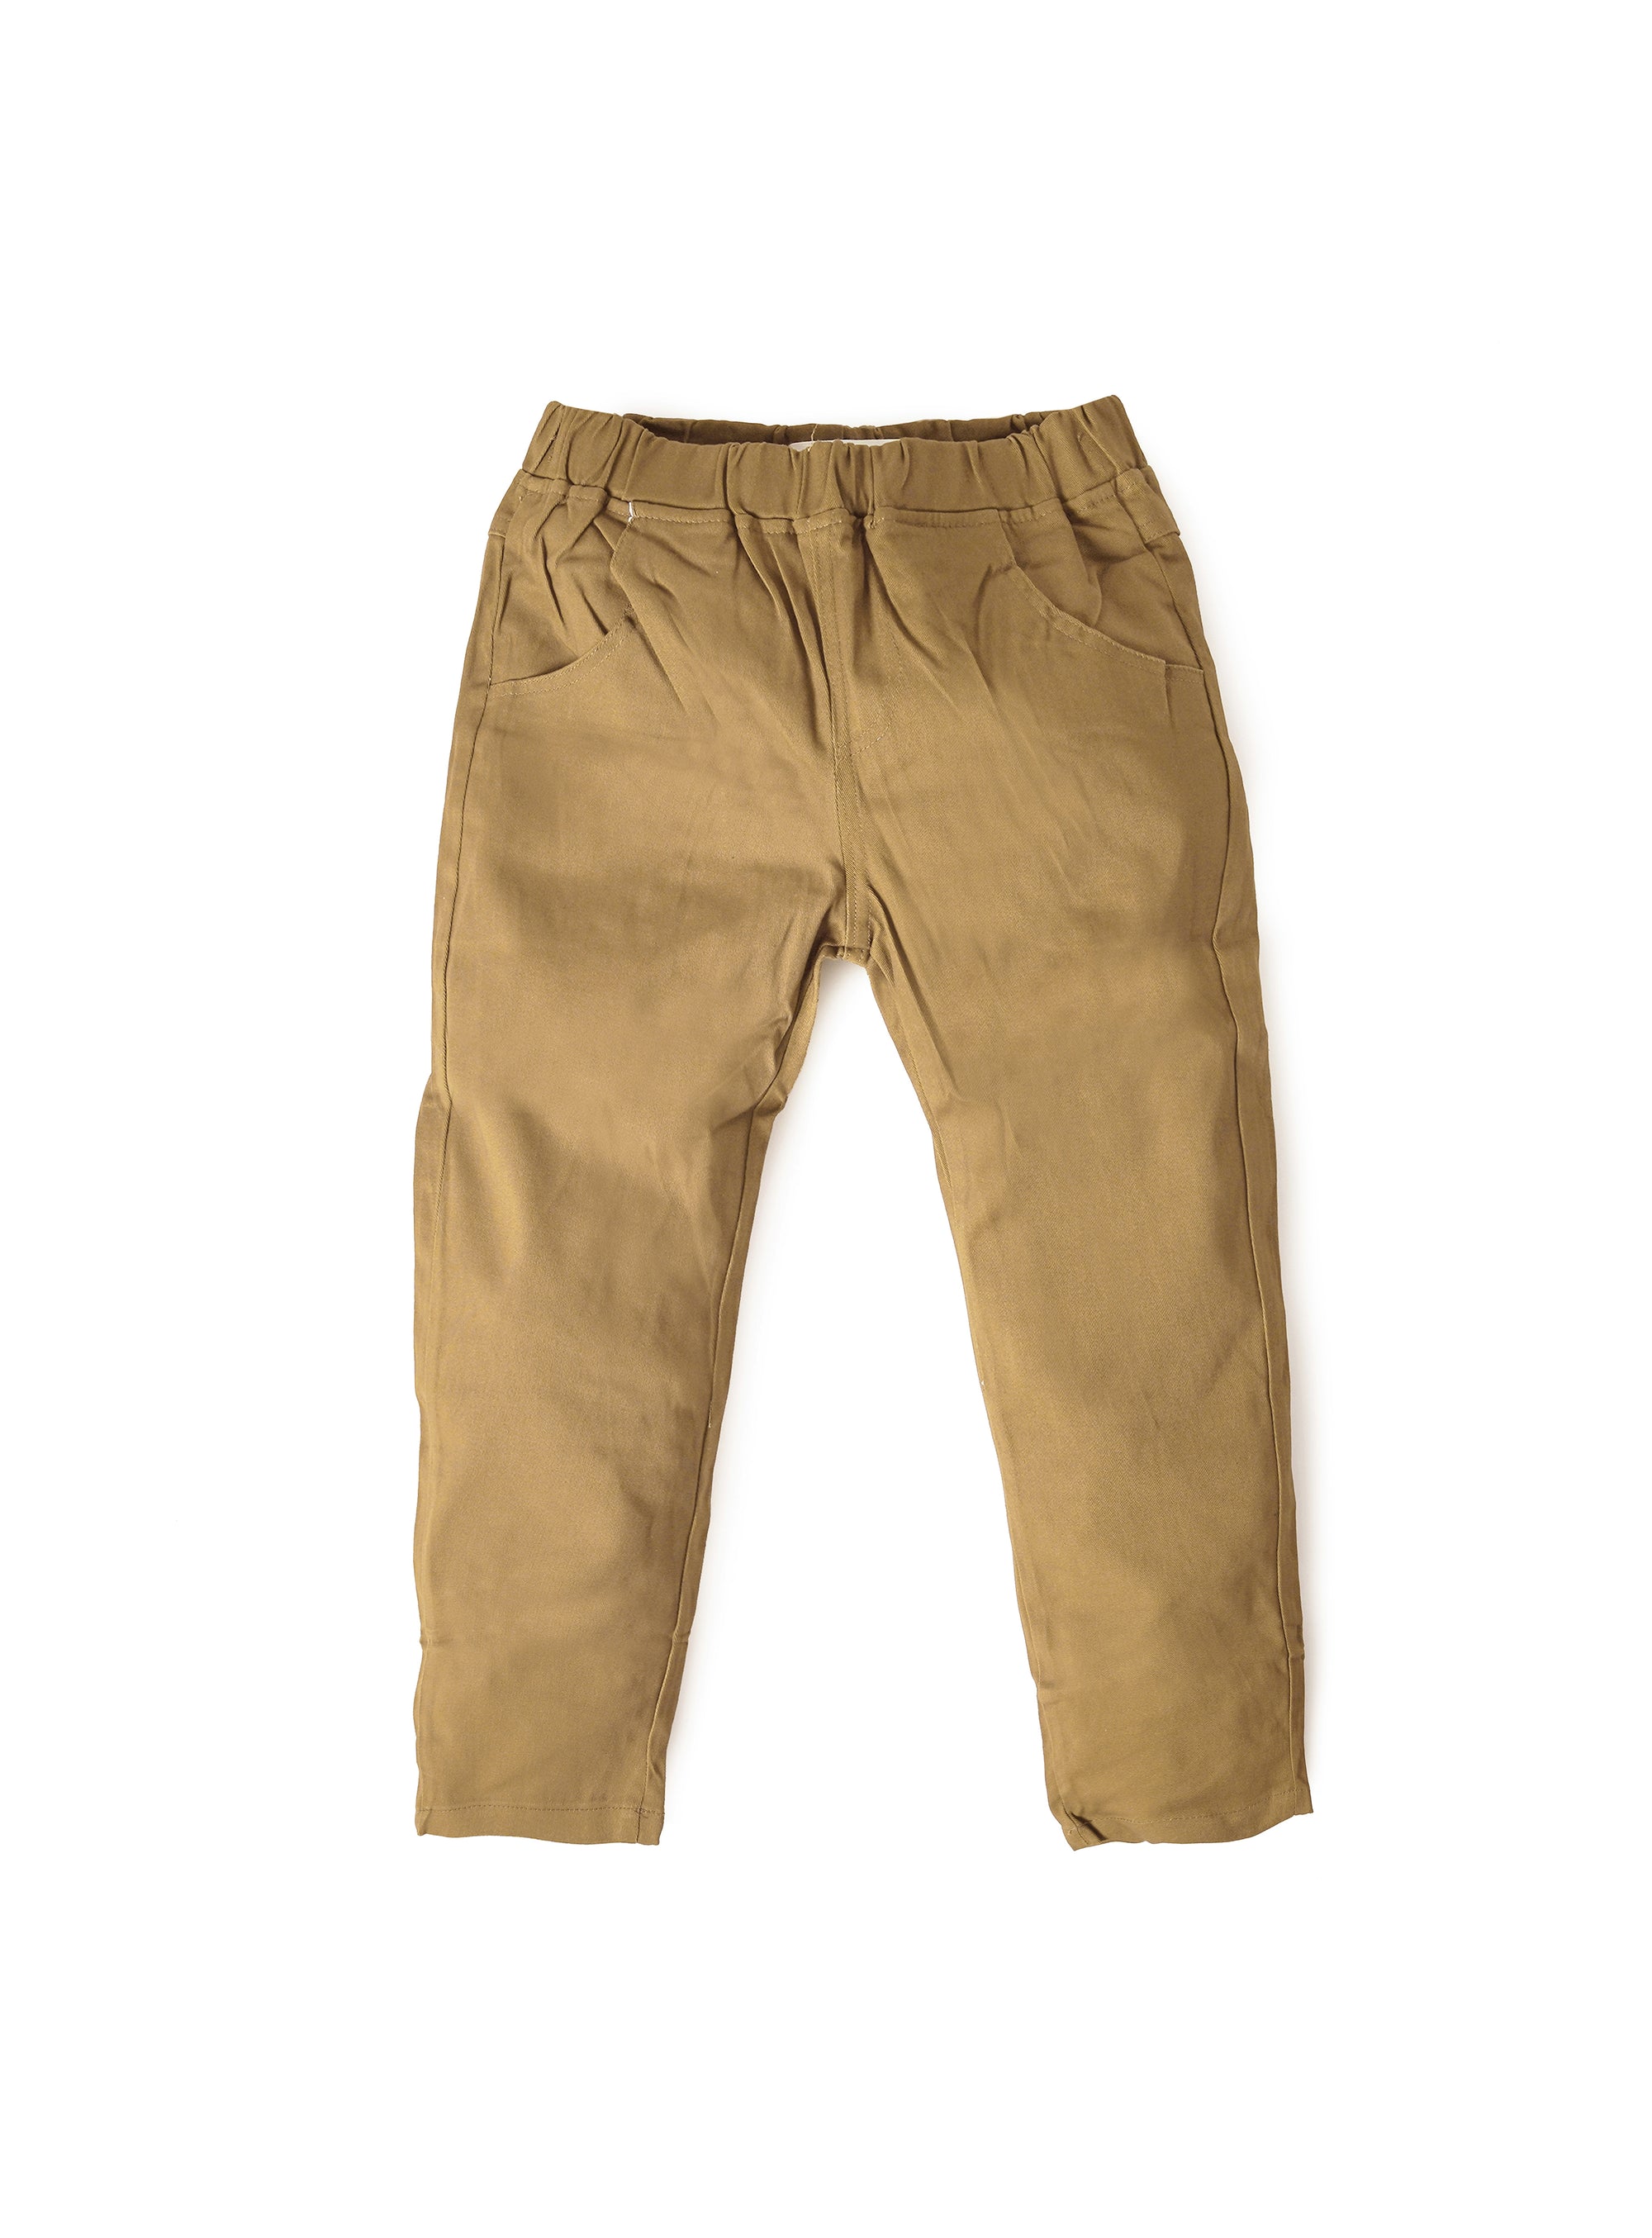 peanut brown chinos with stretchable waist